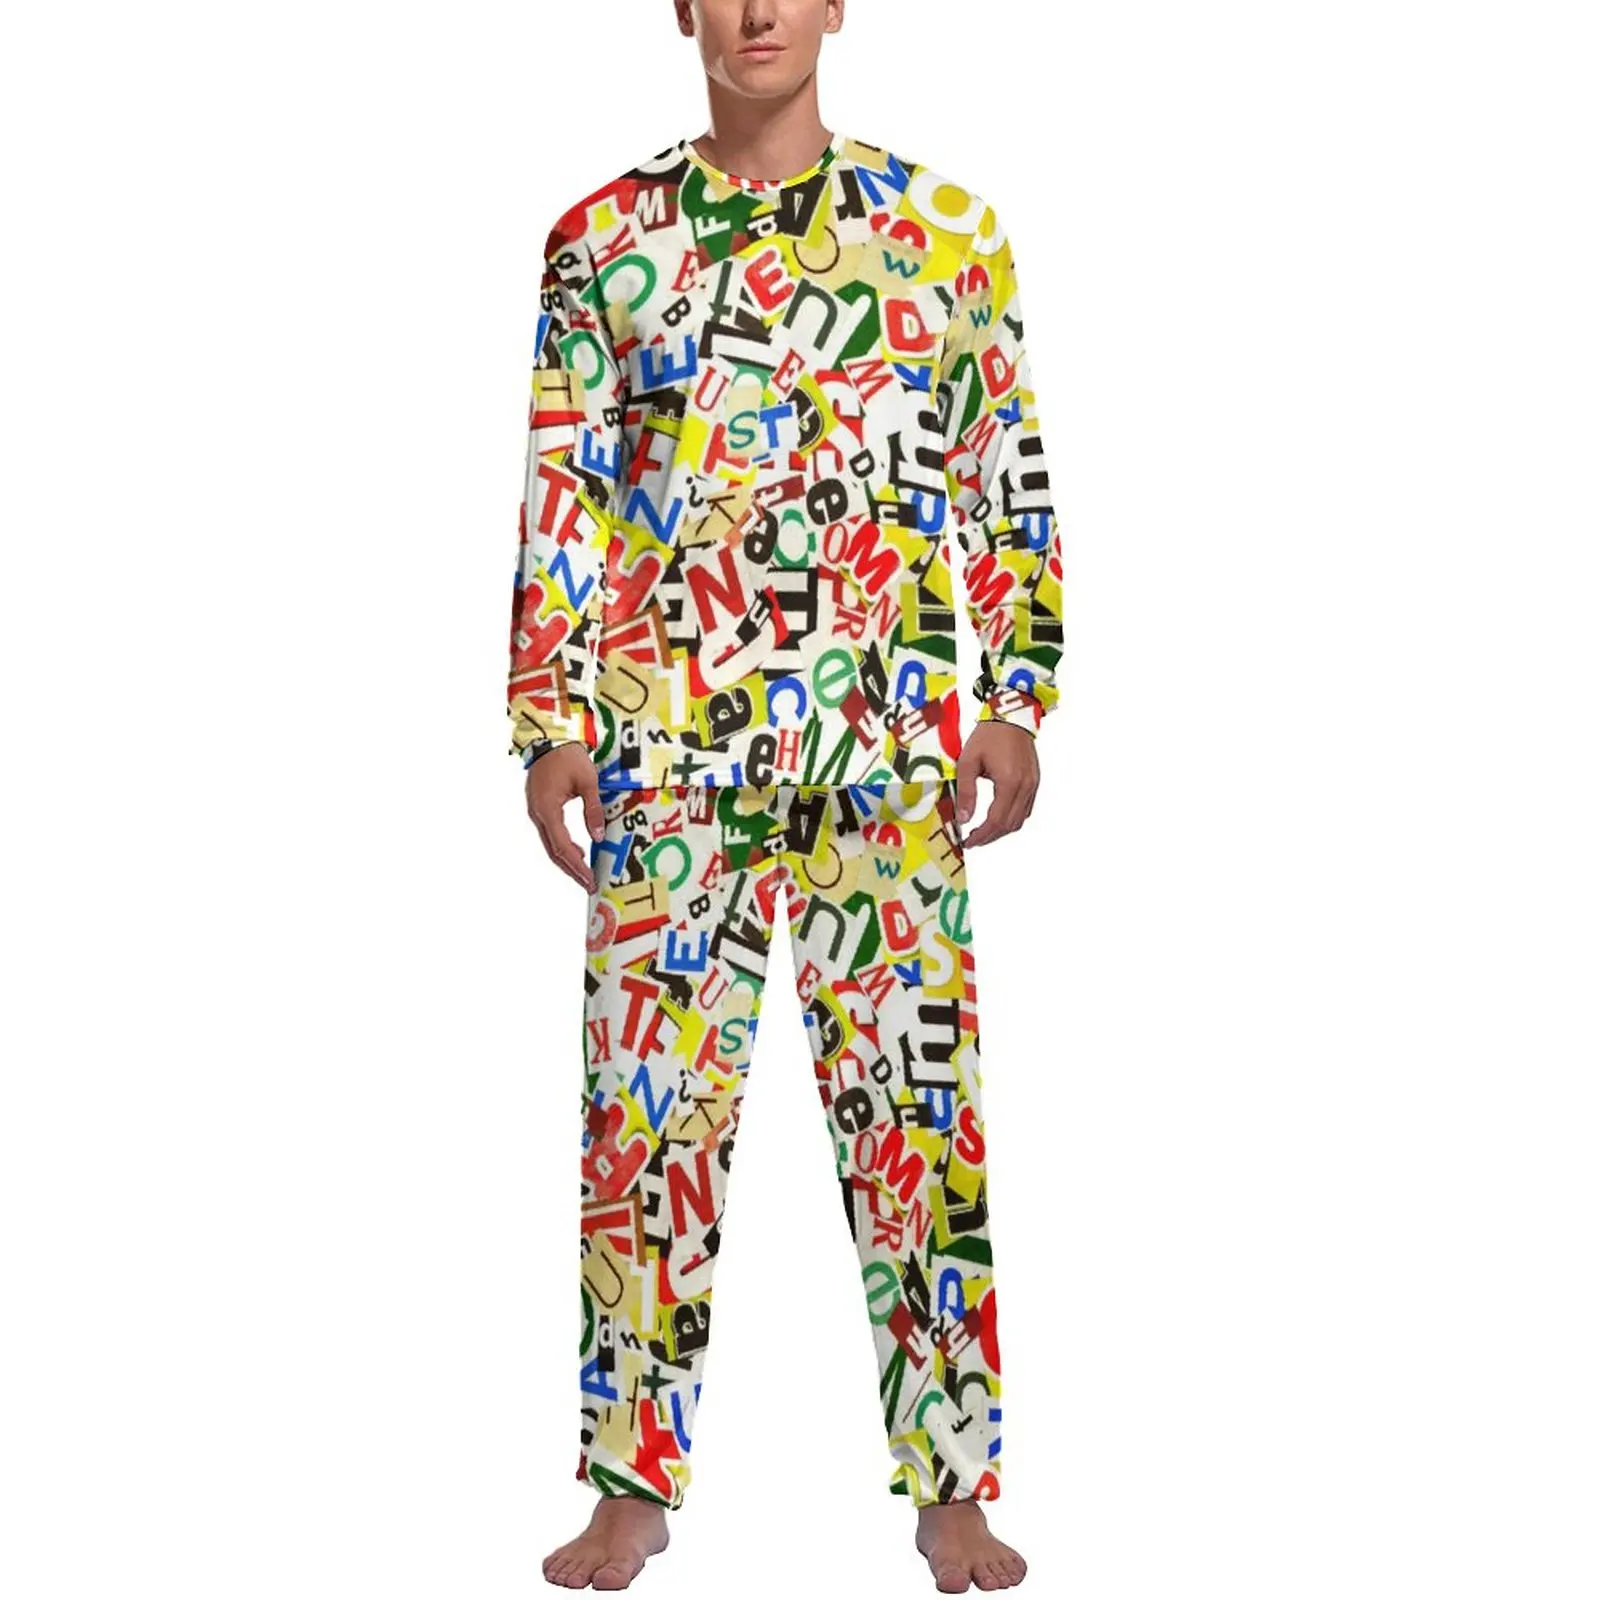 Abstract Letters Pajamas Spring 2 Piece Colorful Alphabet Lovely Pajamas Set Male Long Sleeves Home Graphic Nightwear